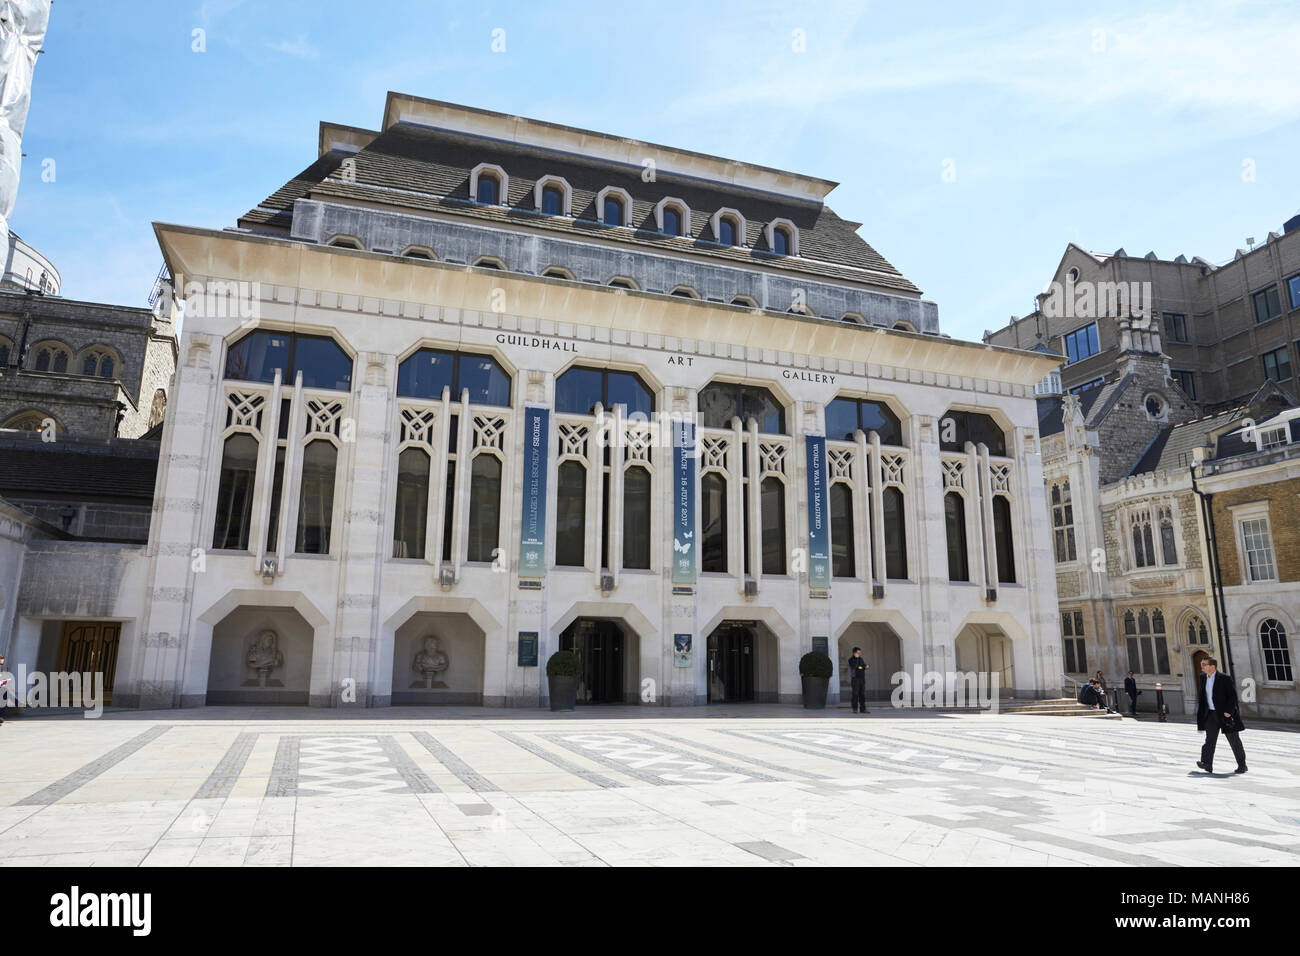 Londres - Mai 2017 : Guildhall Art Gallery, Guildhall Yard, London, EC2. Banque D'Images